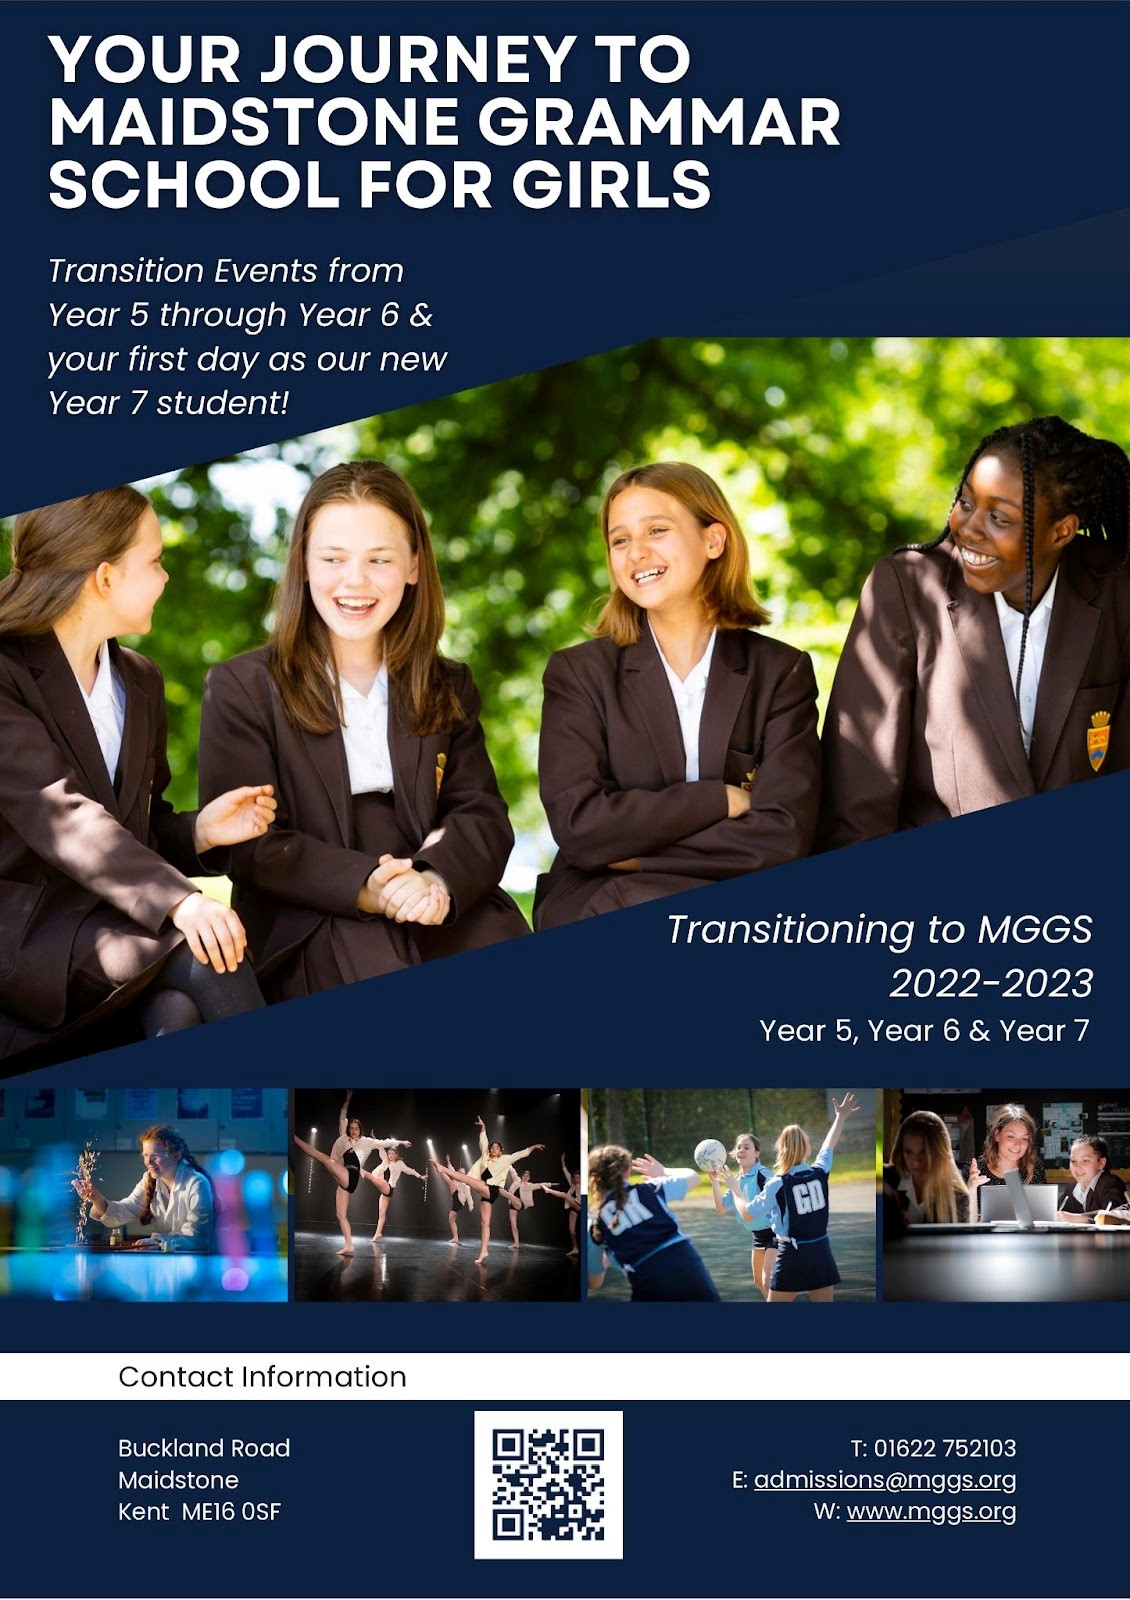 Your Journey to MGGS - Transition Events Years 5, 6 & 7